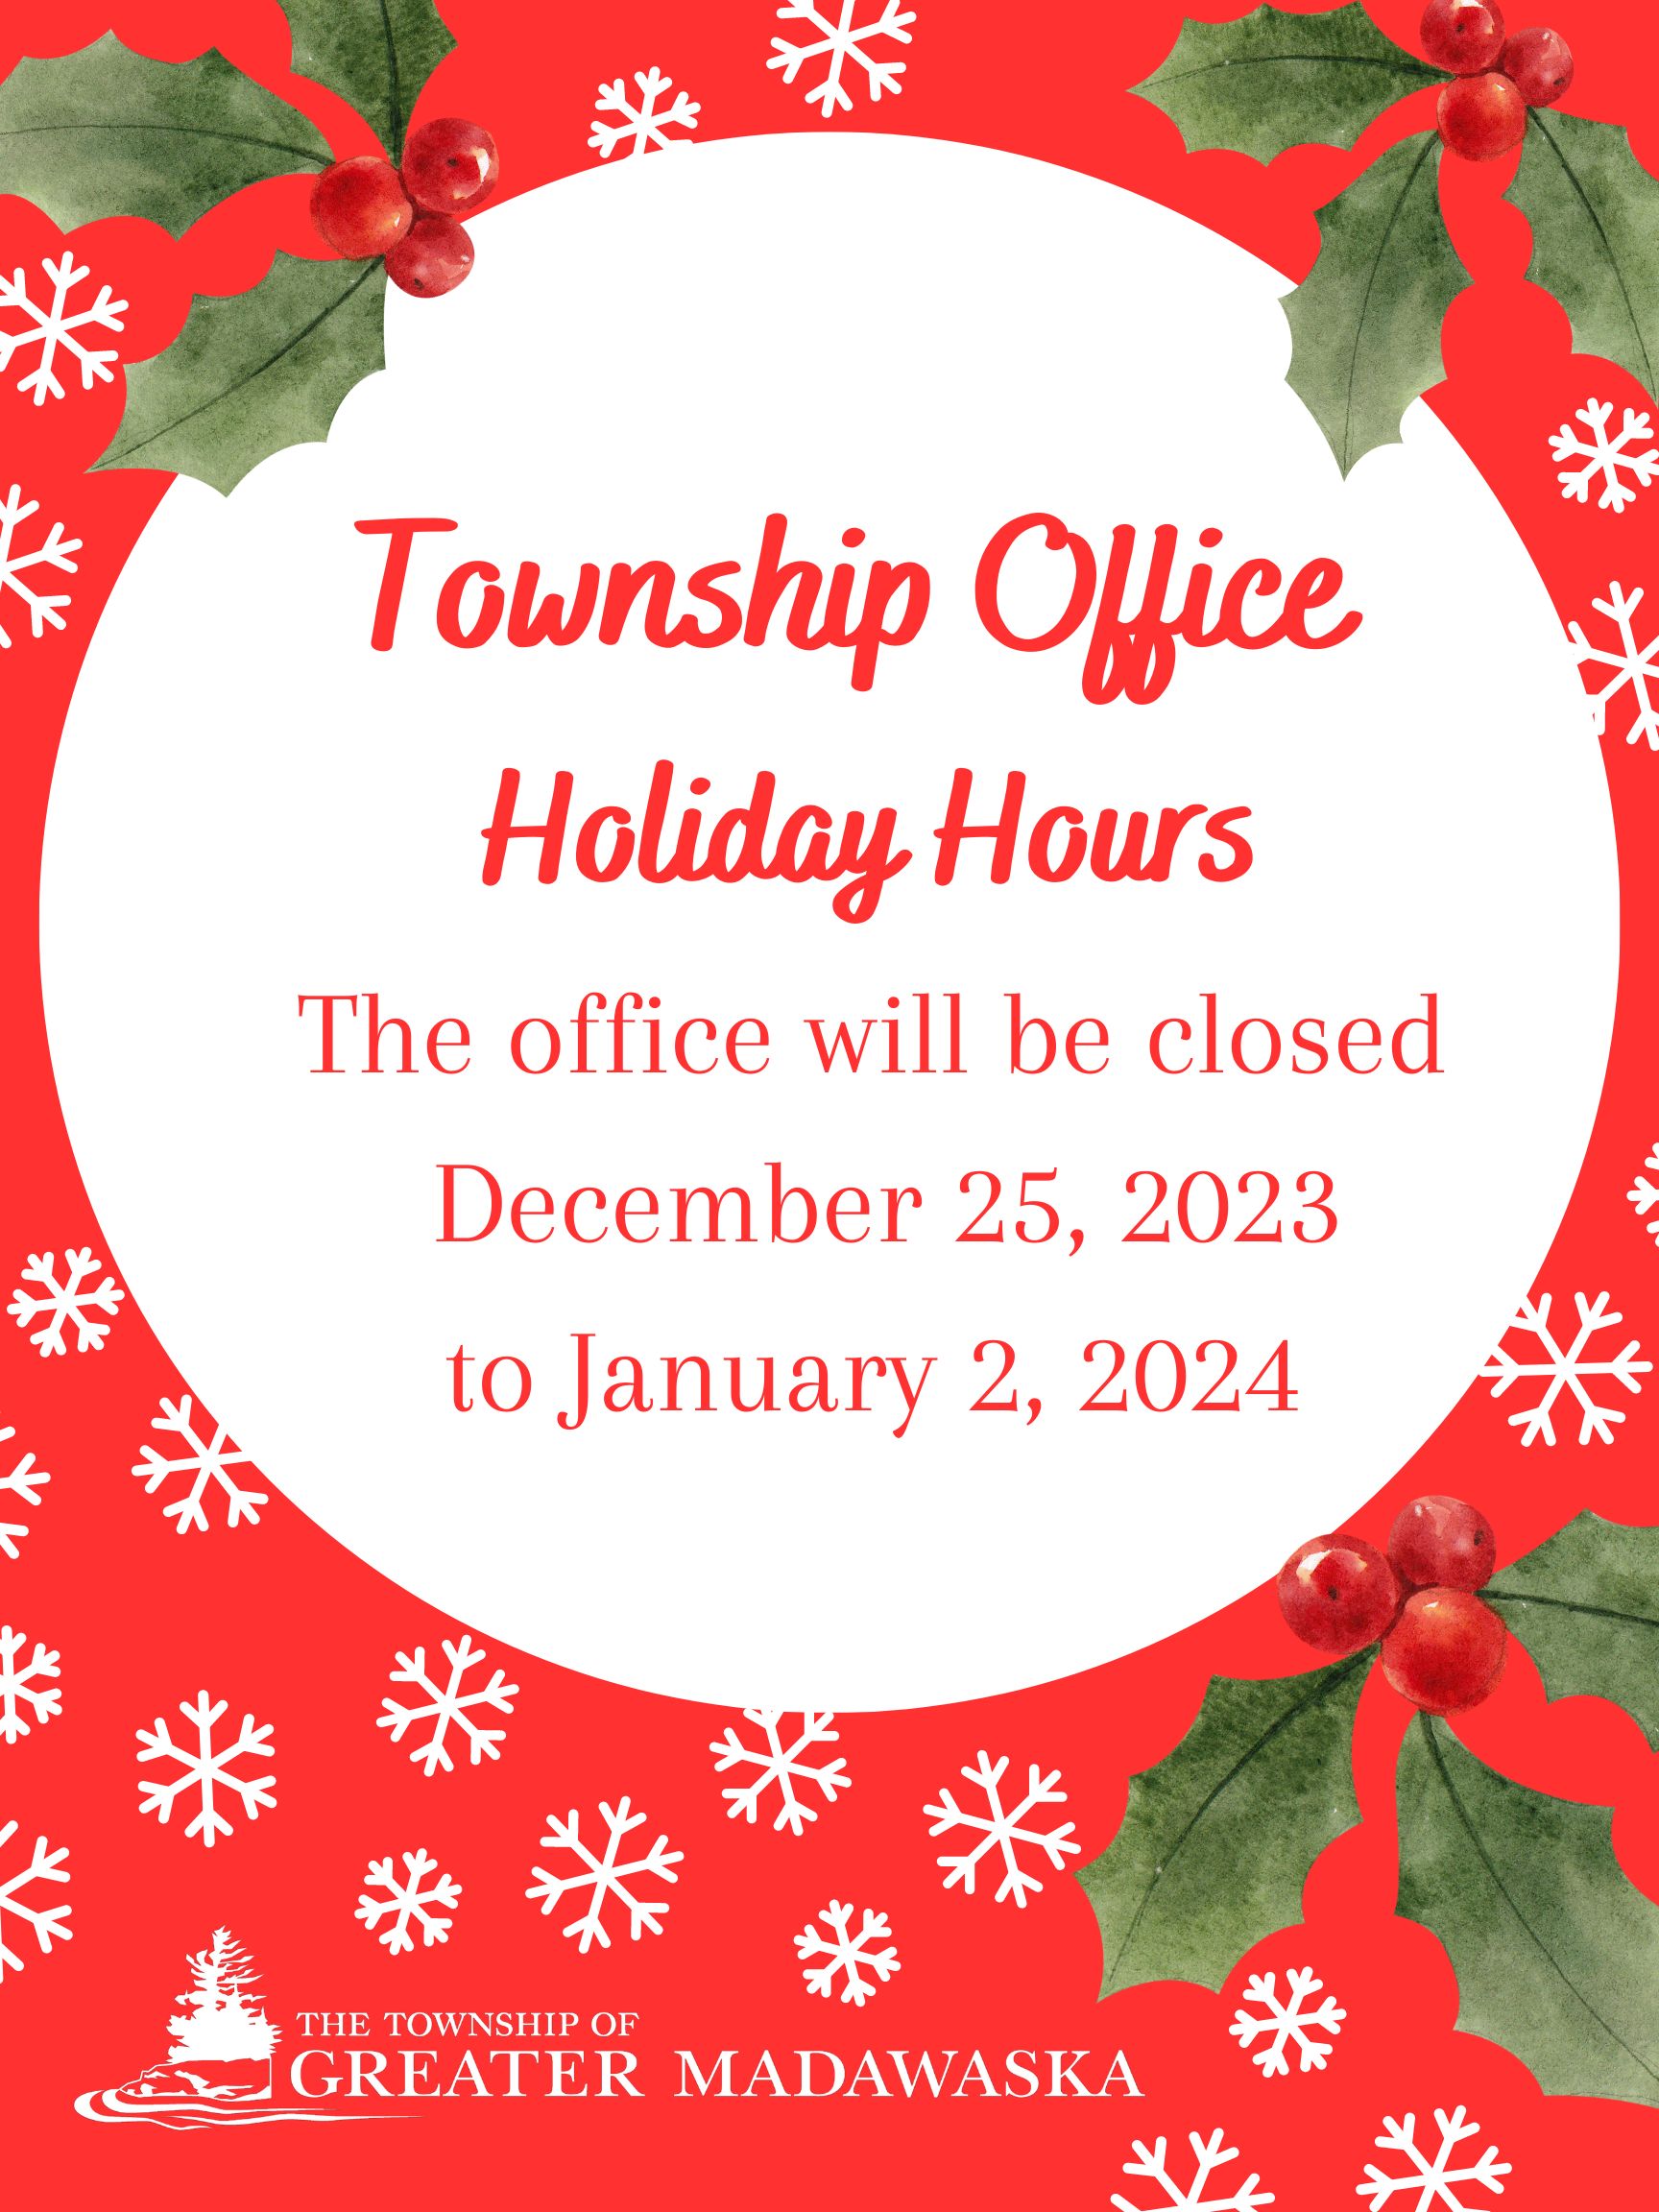 township office closed dec 25, 2023 to Jan 2, 2024